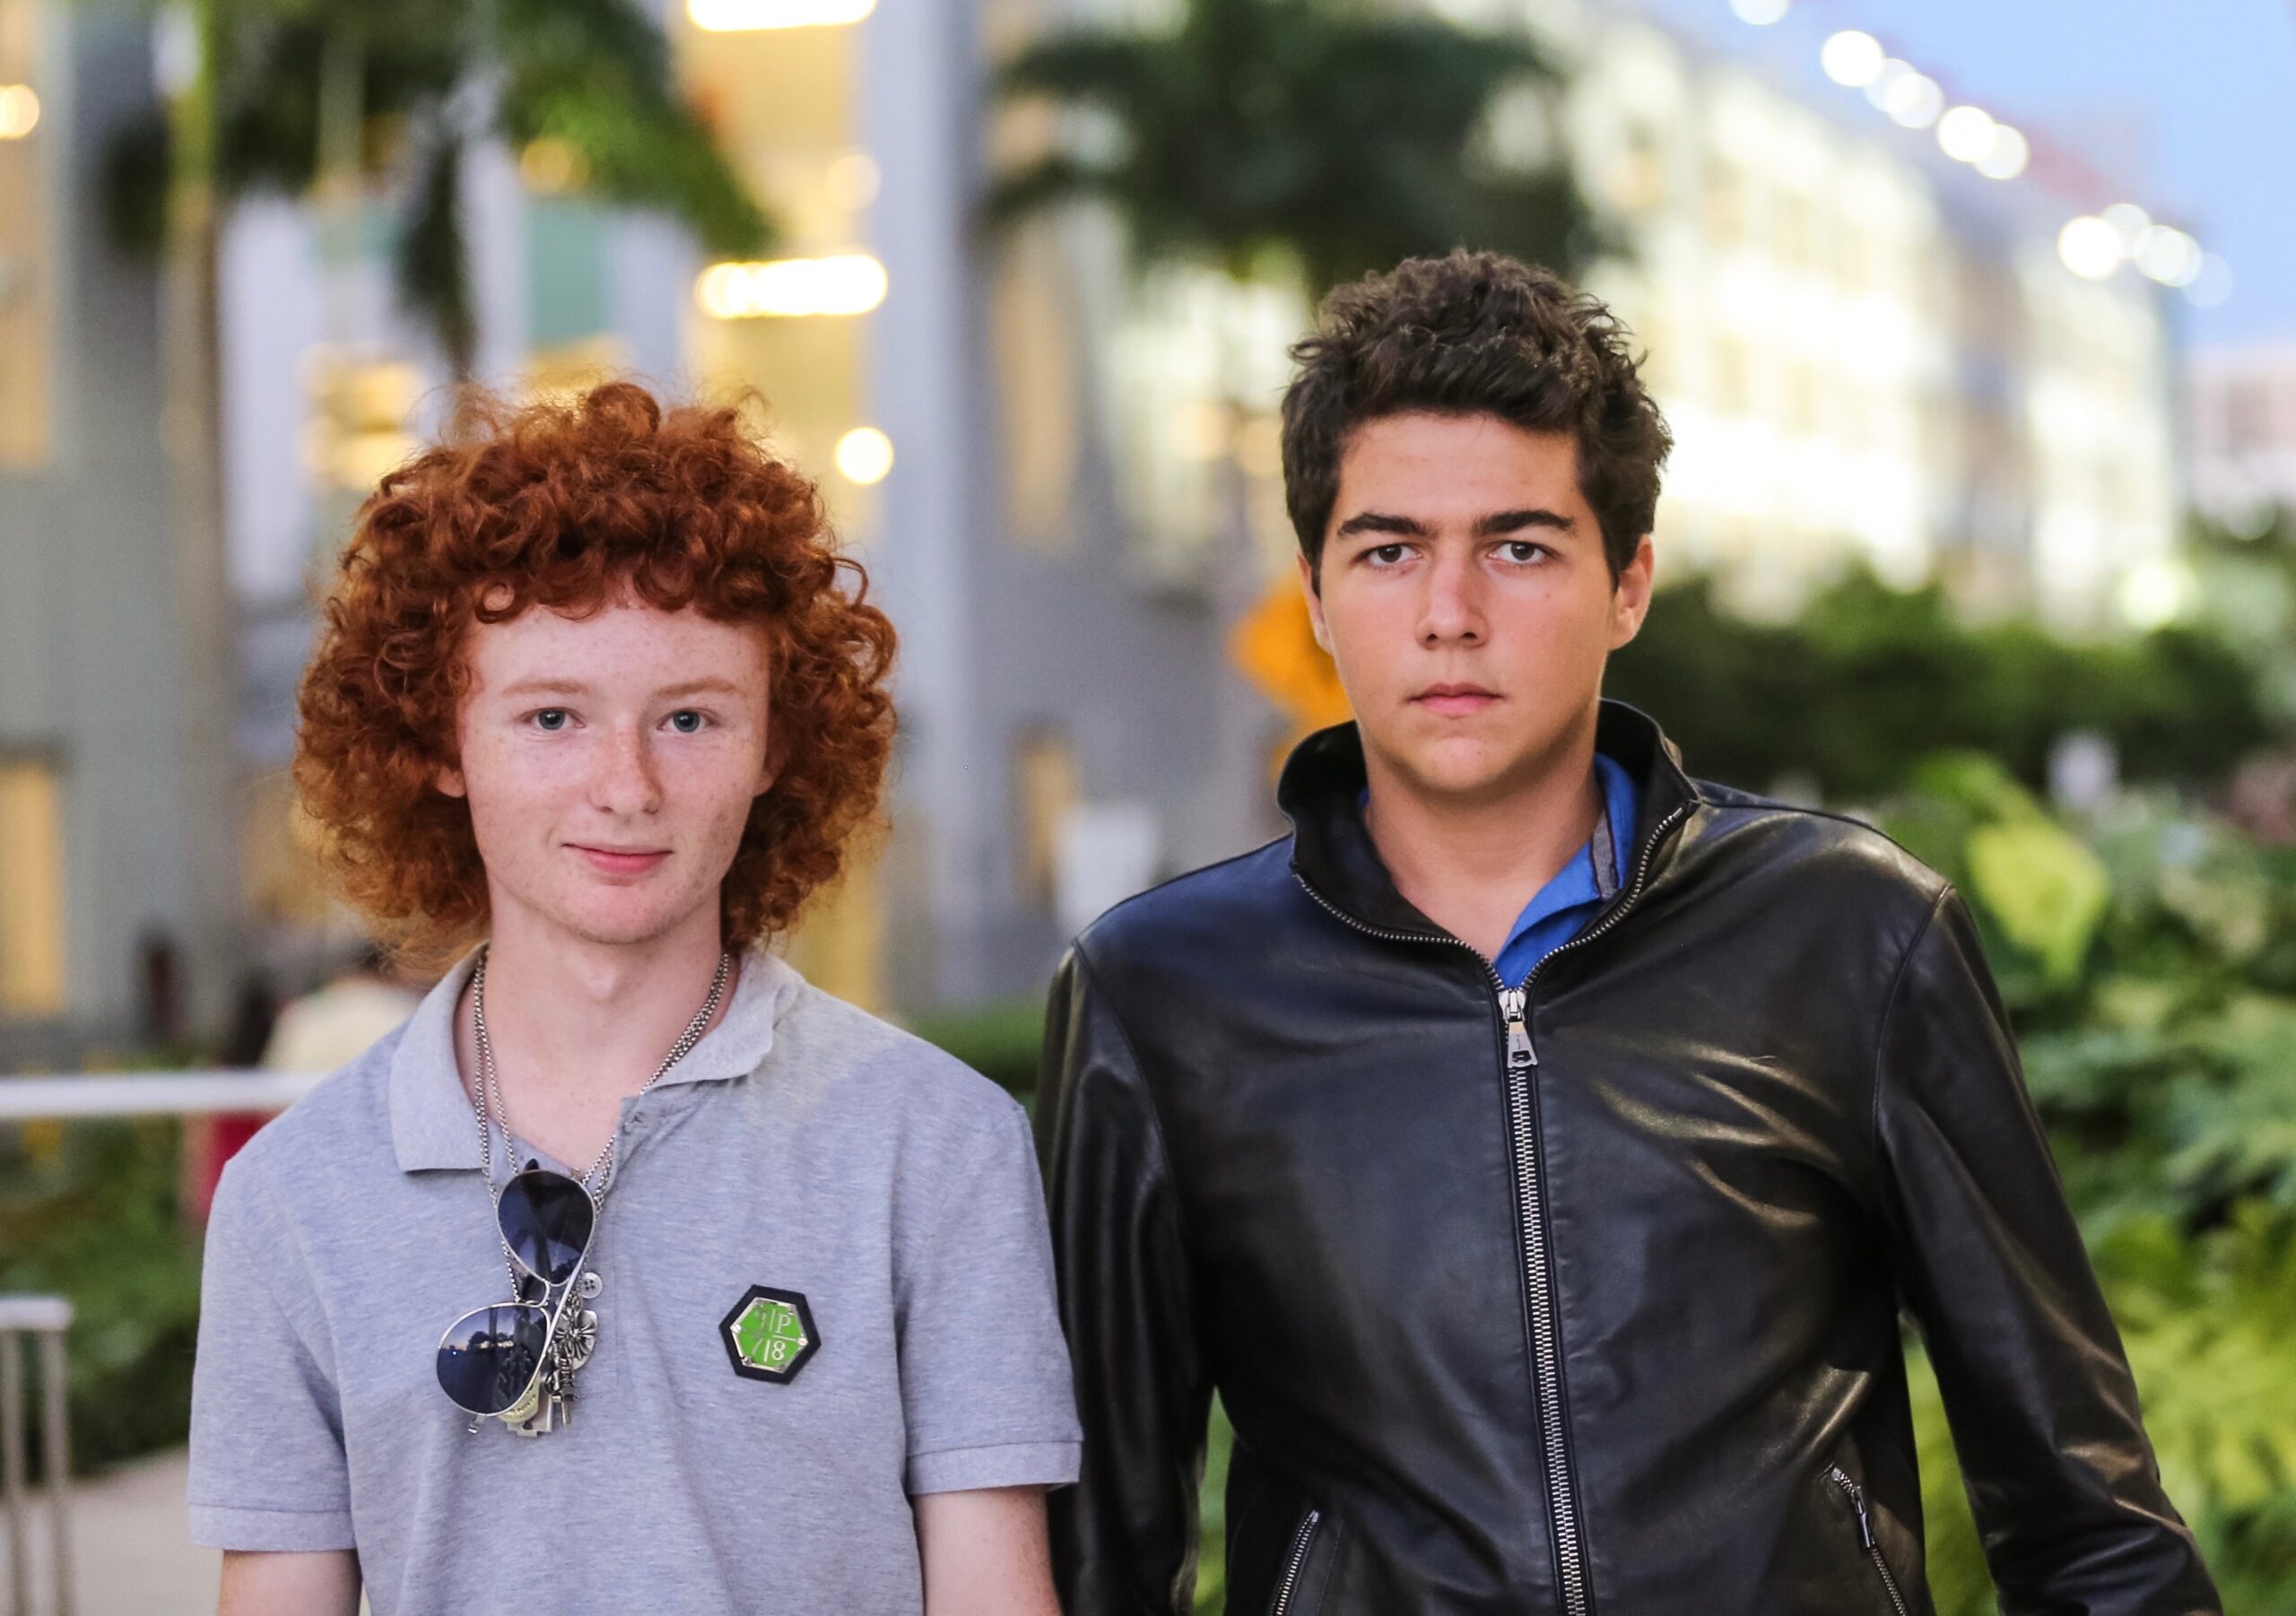 Childhood Friends from Coral Springs Revolutionize Windshield Cleaning with Eco-Friendly Tablets